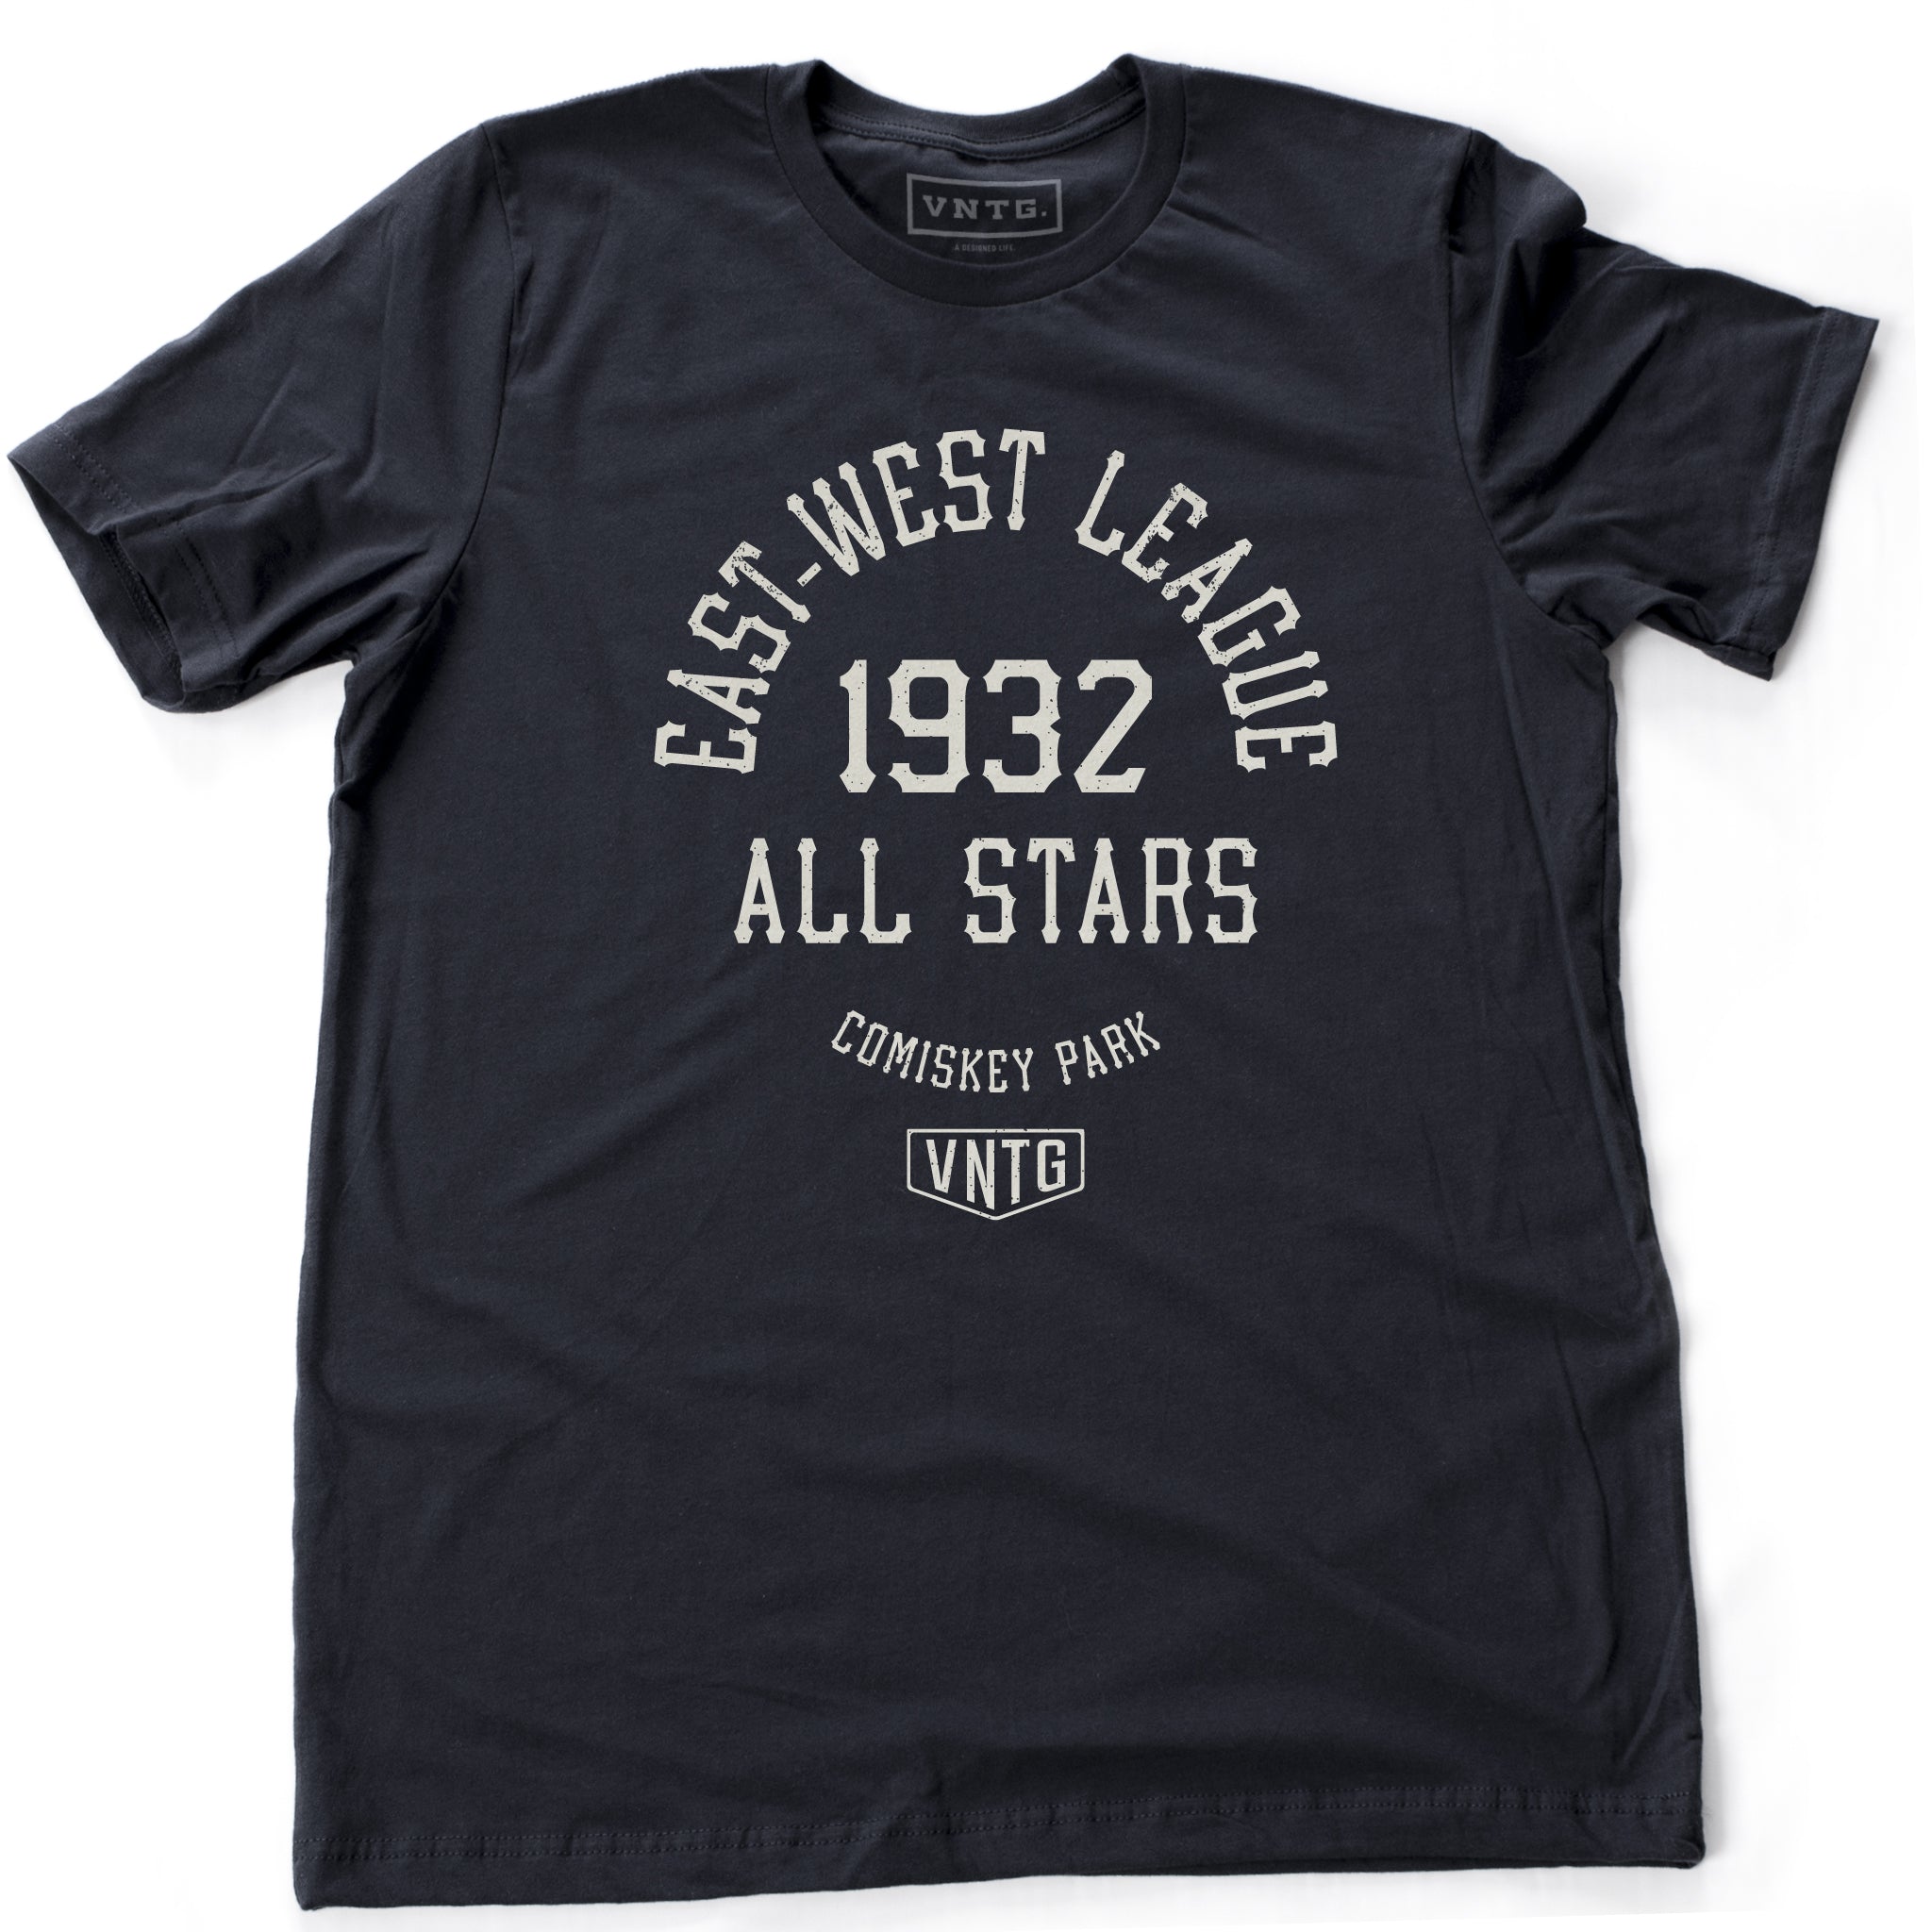 Navy retro t-shirt with vintage graphic of East-West League 1932 All Stars baseball team, for game played at Chicago Comiskey Park